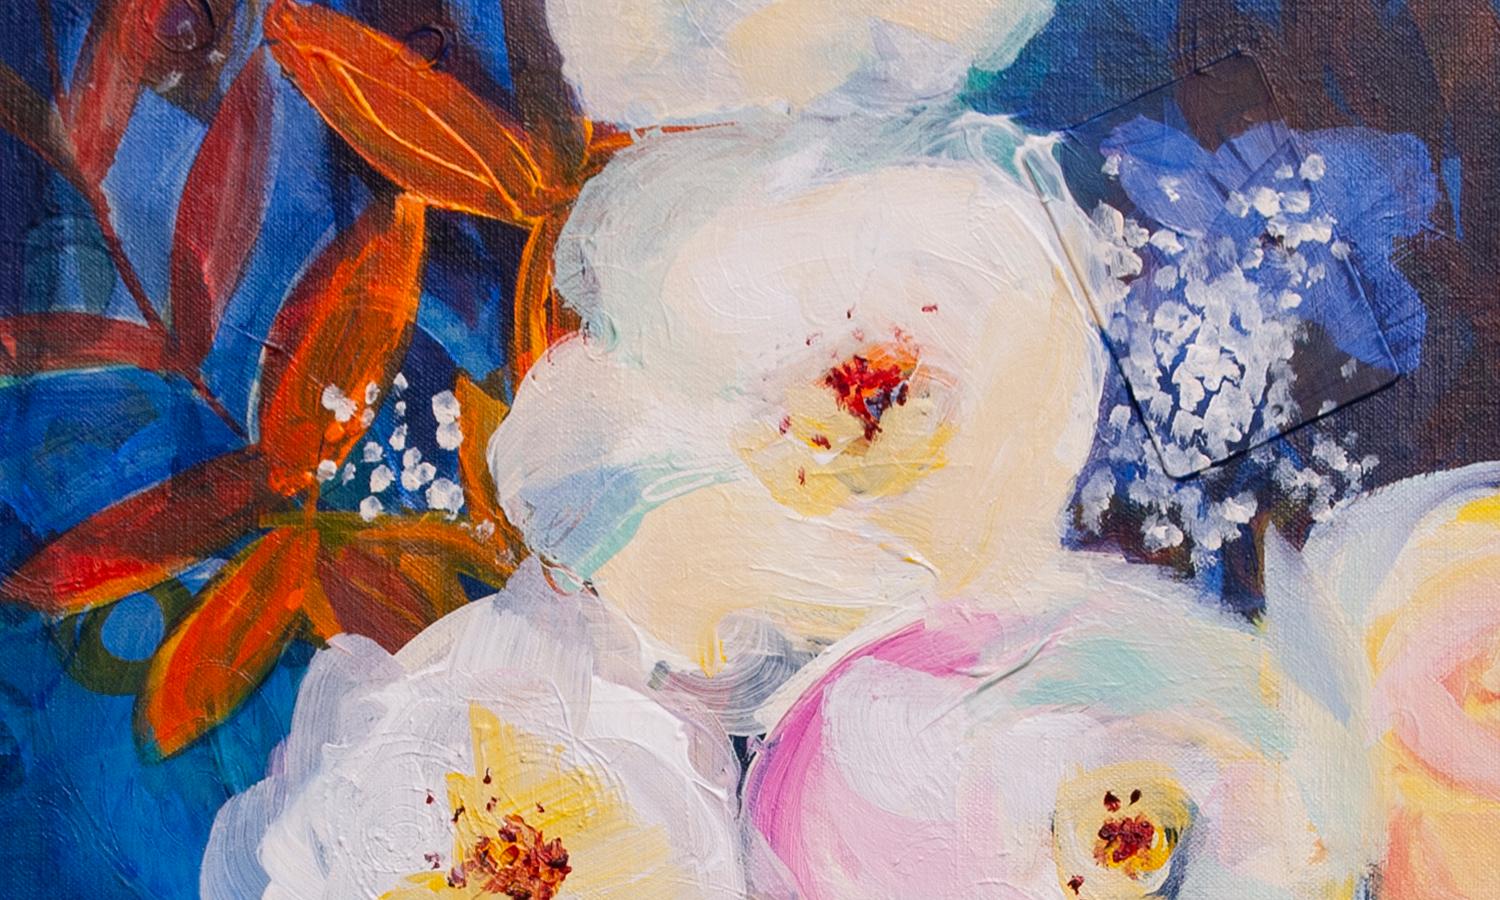 <p>Artist Comments<br />Soft, cloud-like flowers intermingle in a rust red vase. Ruth-Anne developed depth in the blossoms with layers of pastel yellow, pink and teal, set off with the deep blue backdrop.</p><br /><p>About the Artist<br />Ruth-Anne